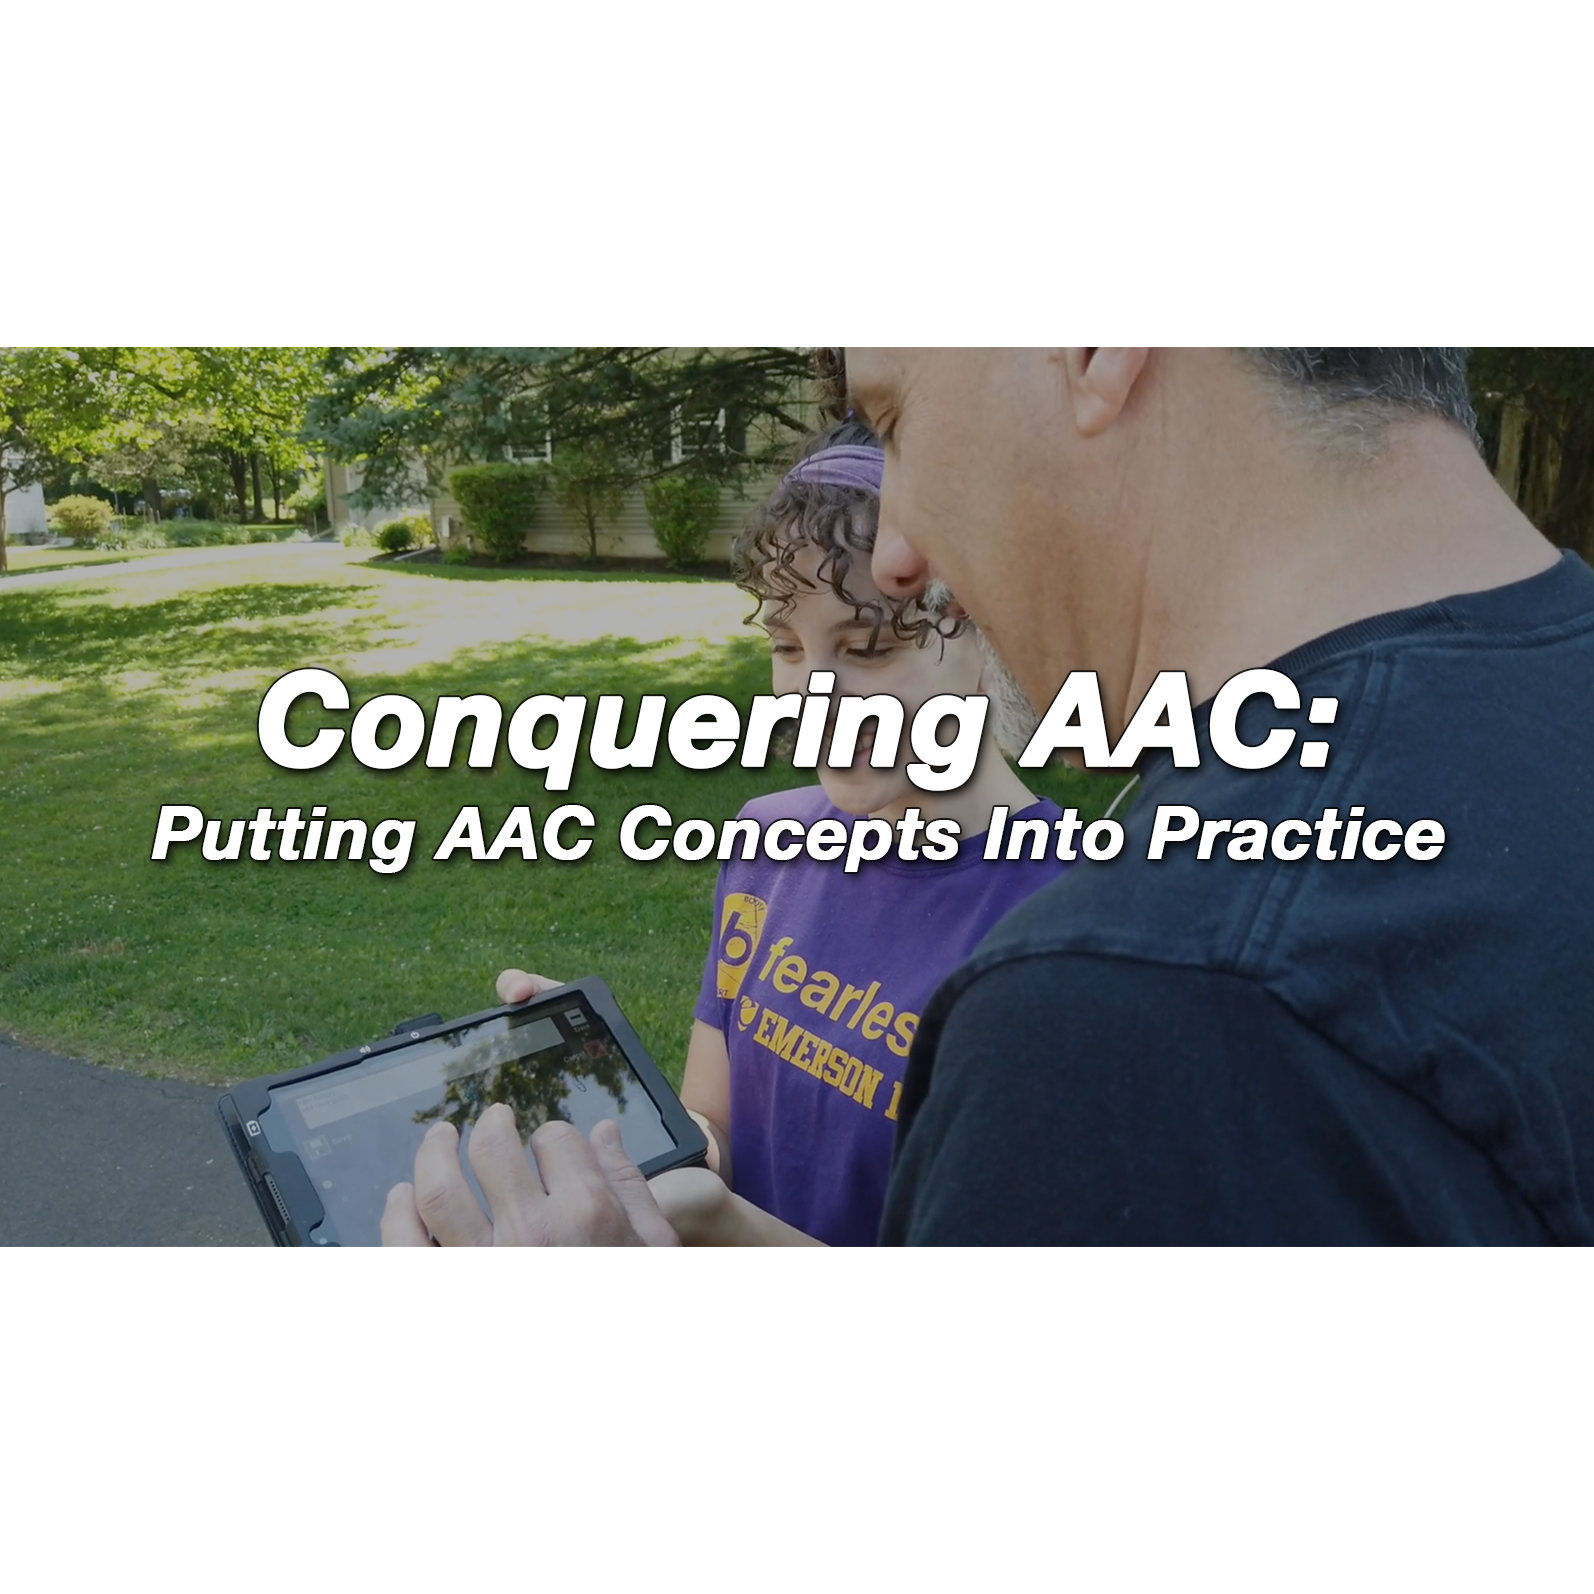 Conquering AAC: Putting AAC Concepts Into Practice (Course 3)